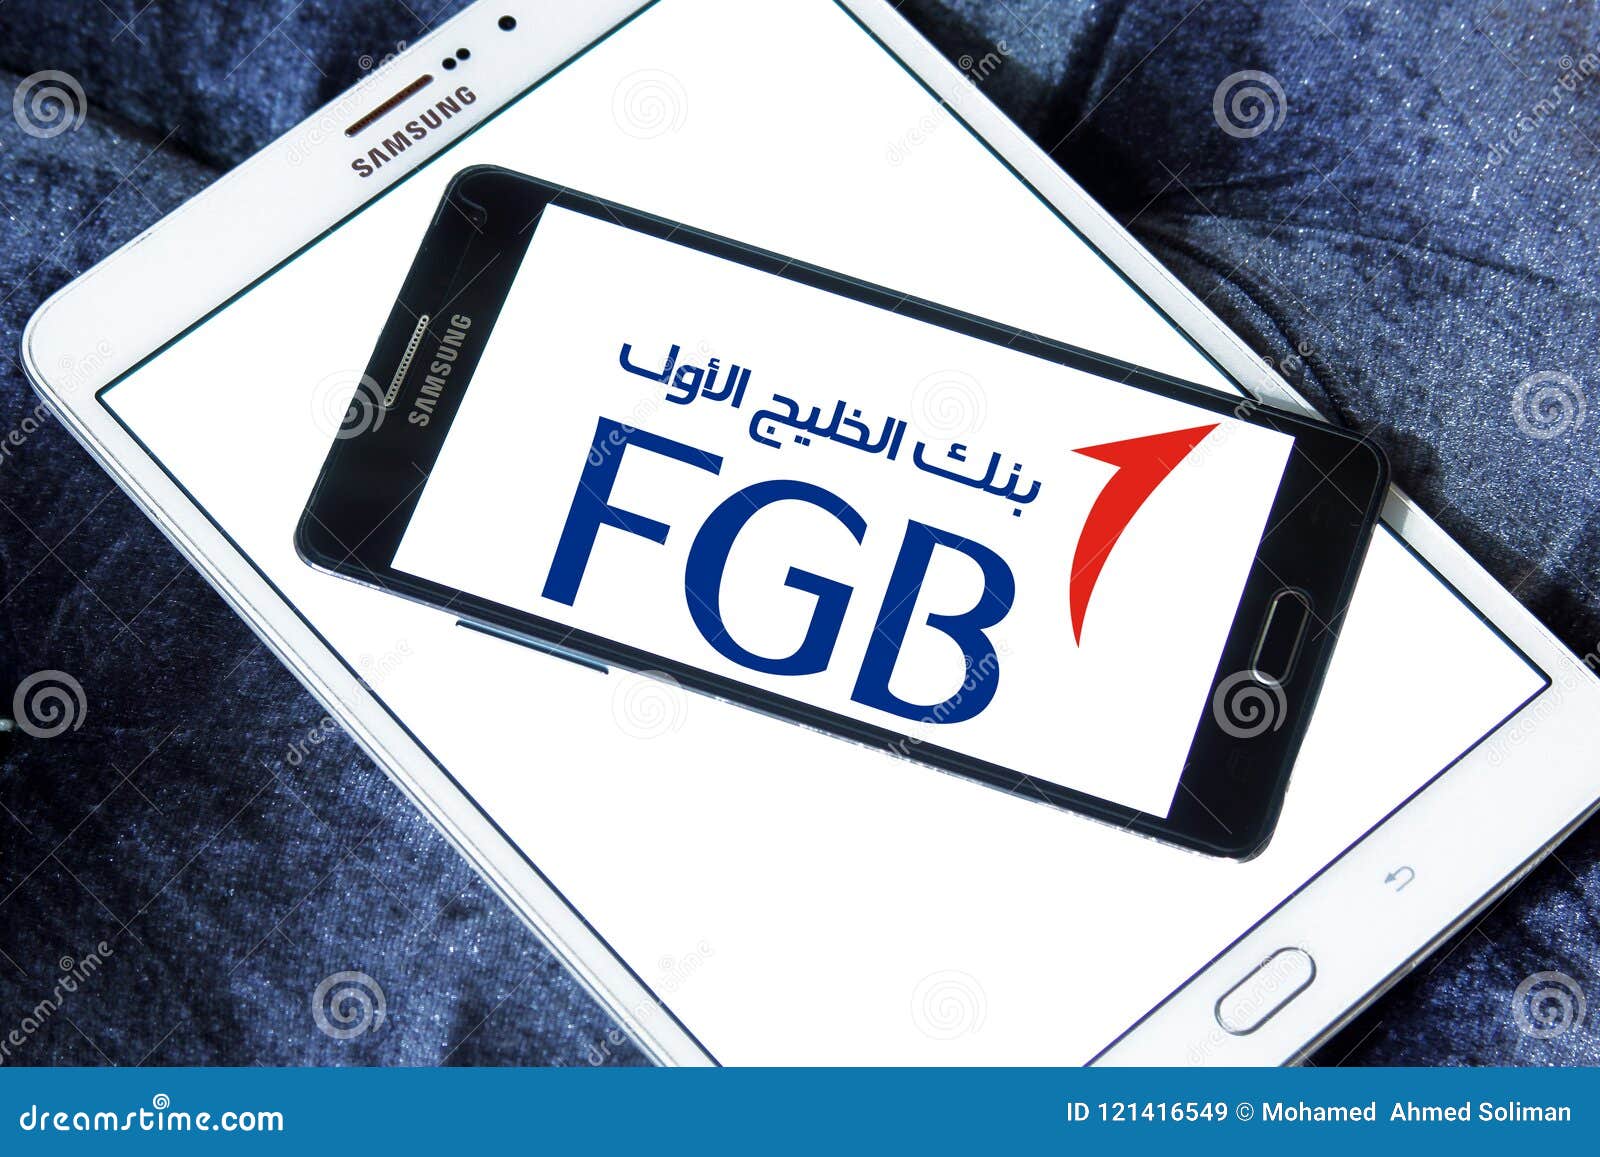 First Gulf Bank Fgb Logo Editorial Stock Image Image Of Symbol